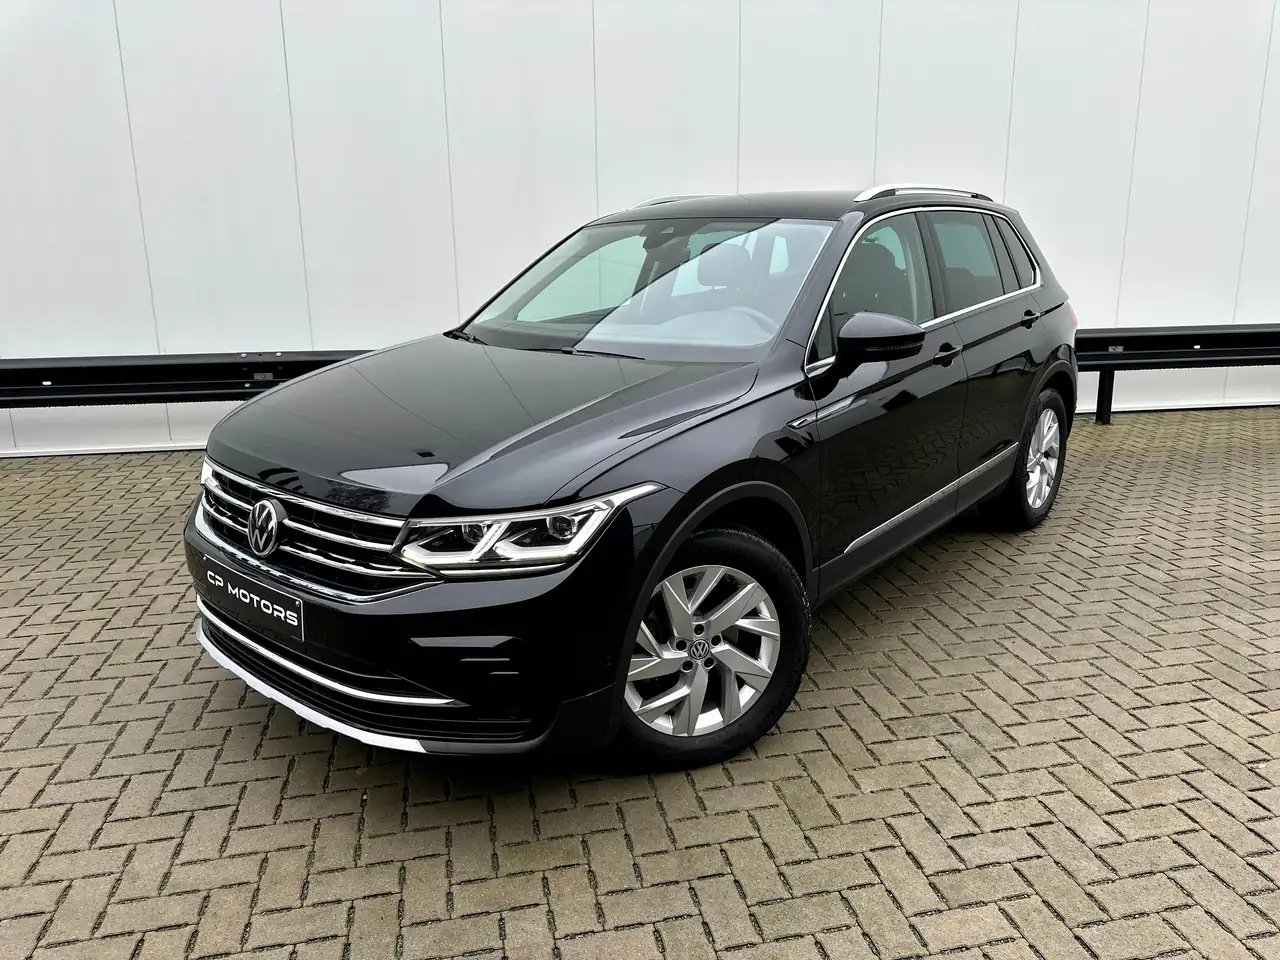 Buy Volkswagen Tiguan from Germany, used Volkswagen Tiguan for sale with  mileage on mobile.de, autoscout24 in English